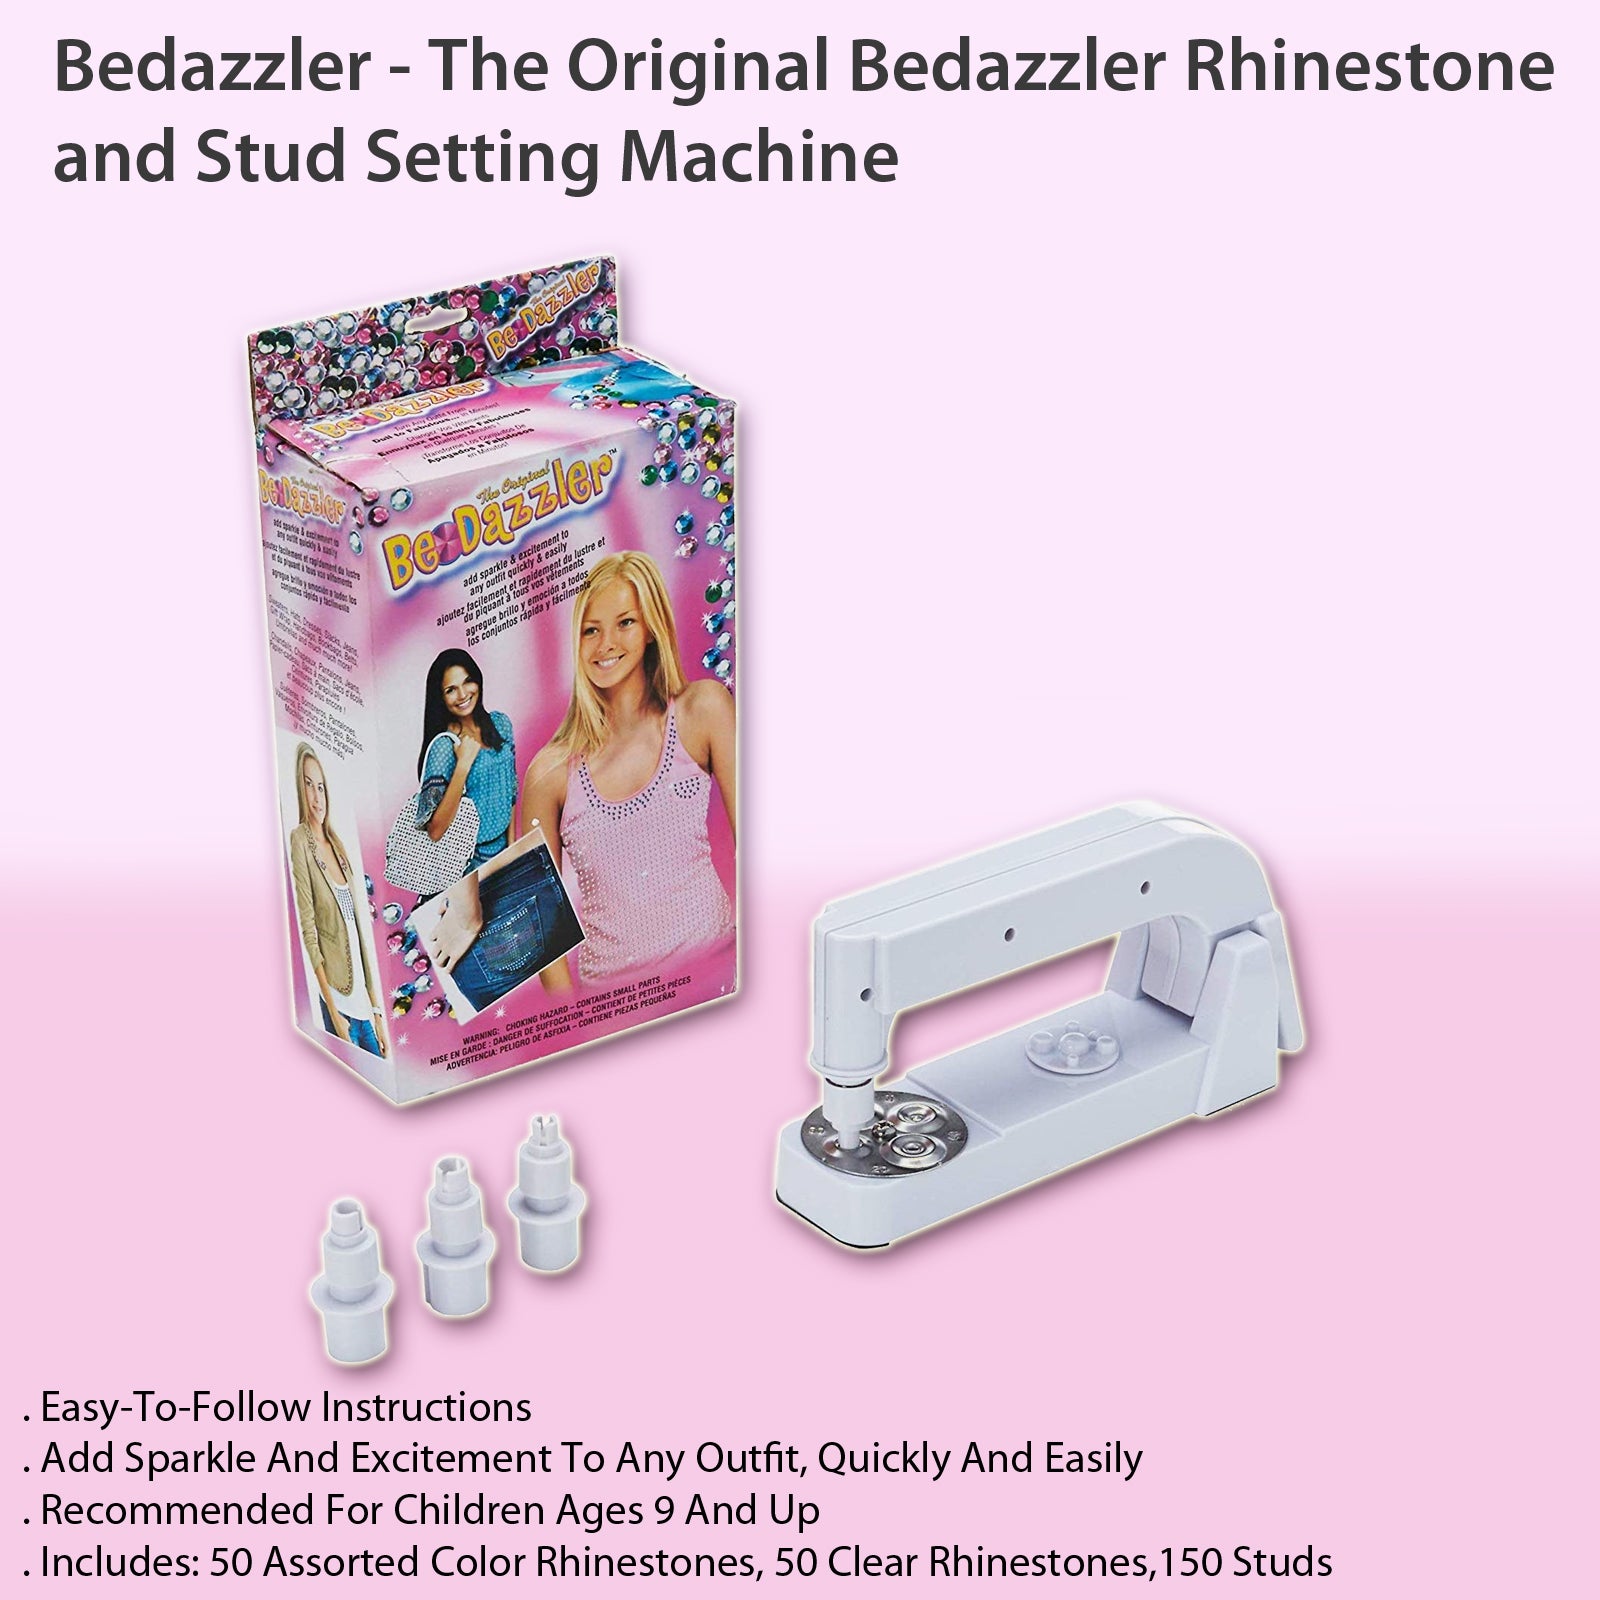 Bedazzler - The Original Bedazzler Rhinestone and Stud Setting